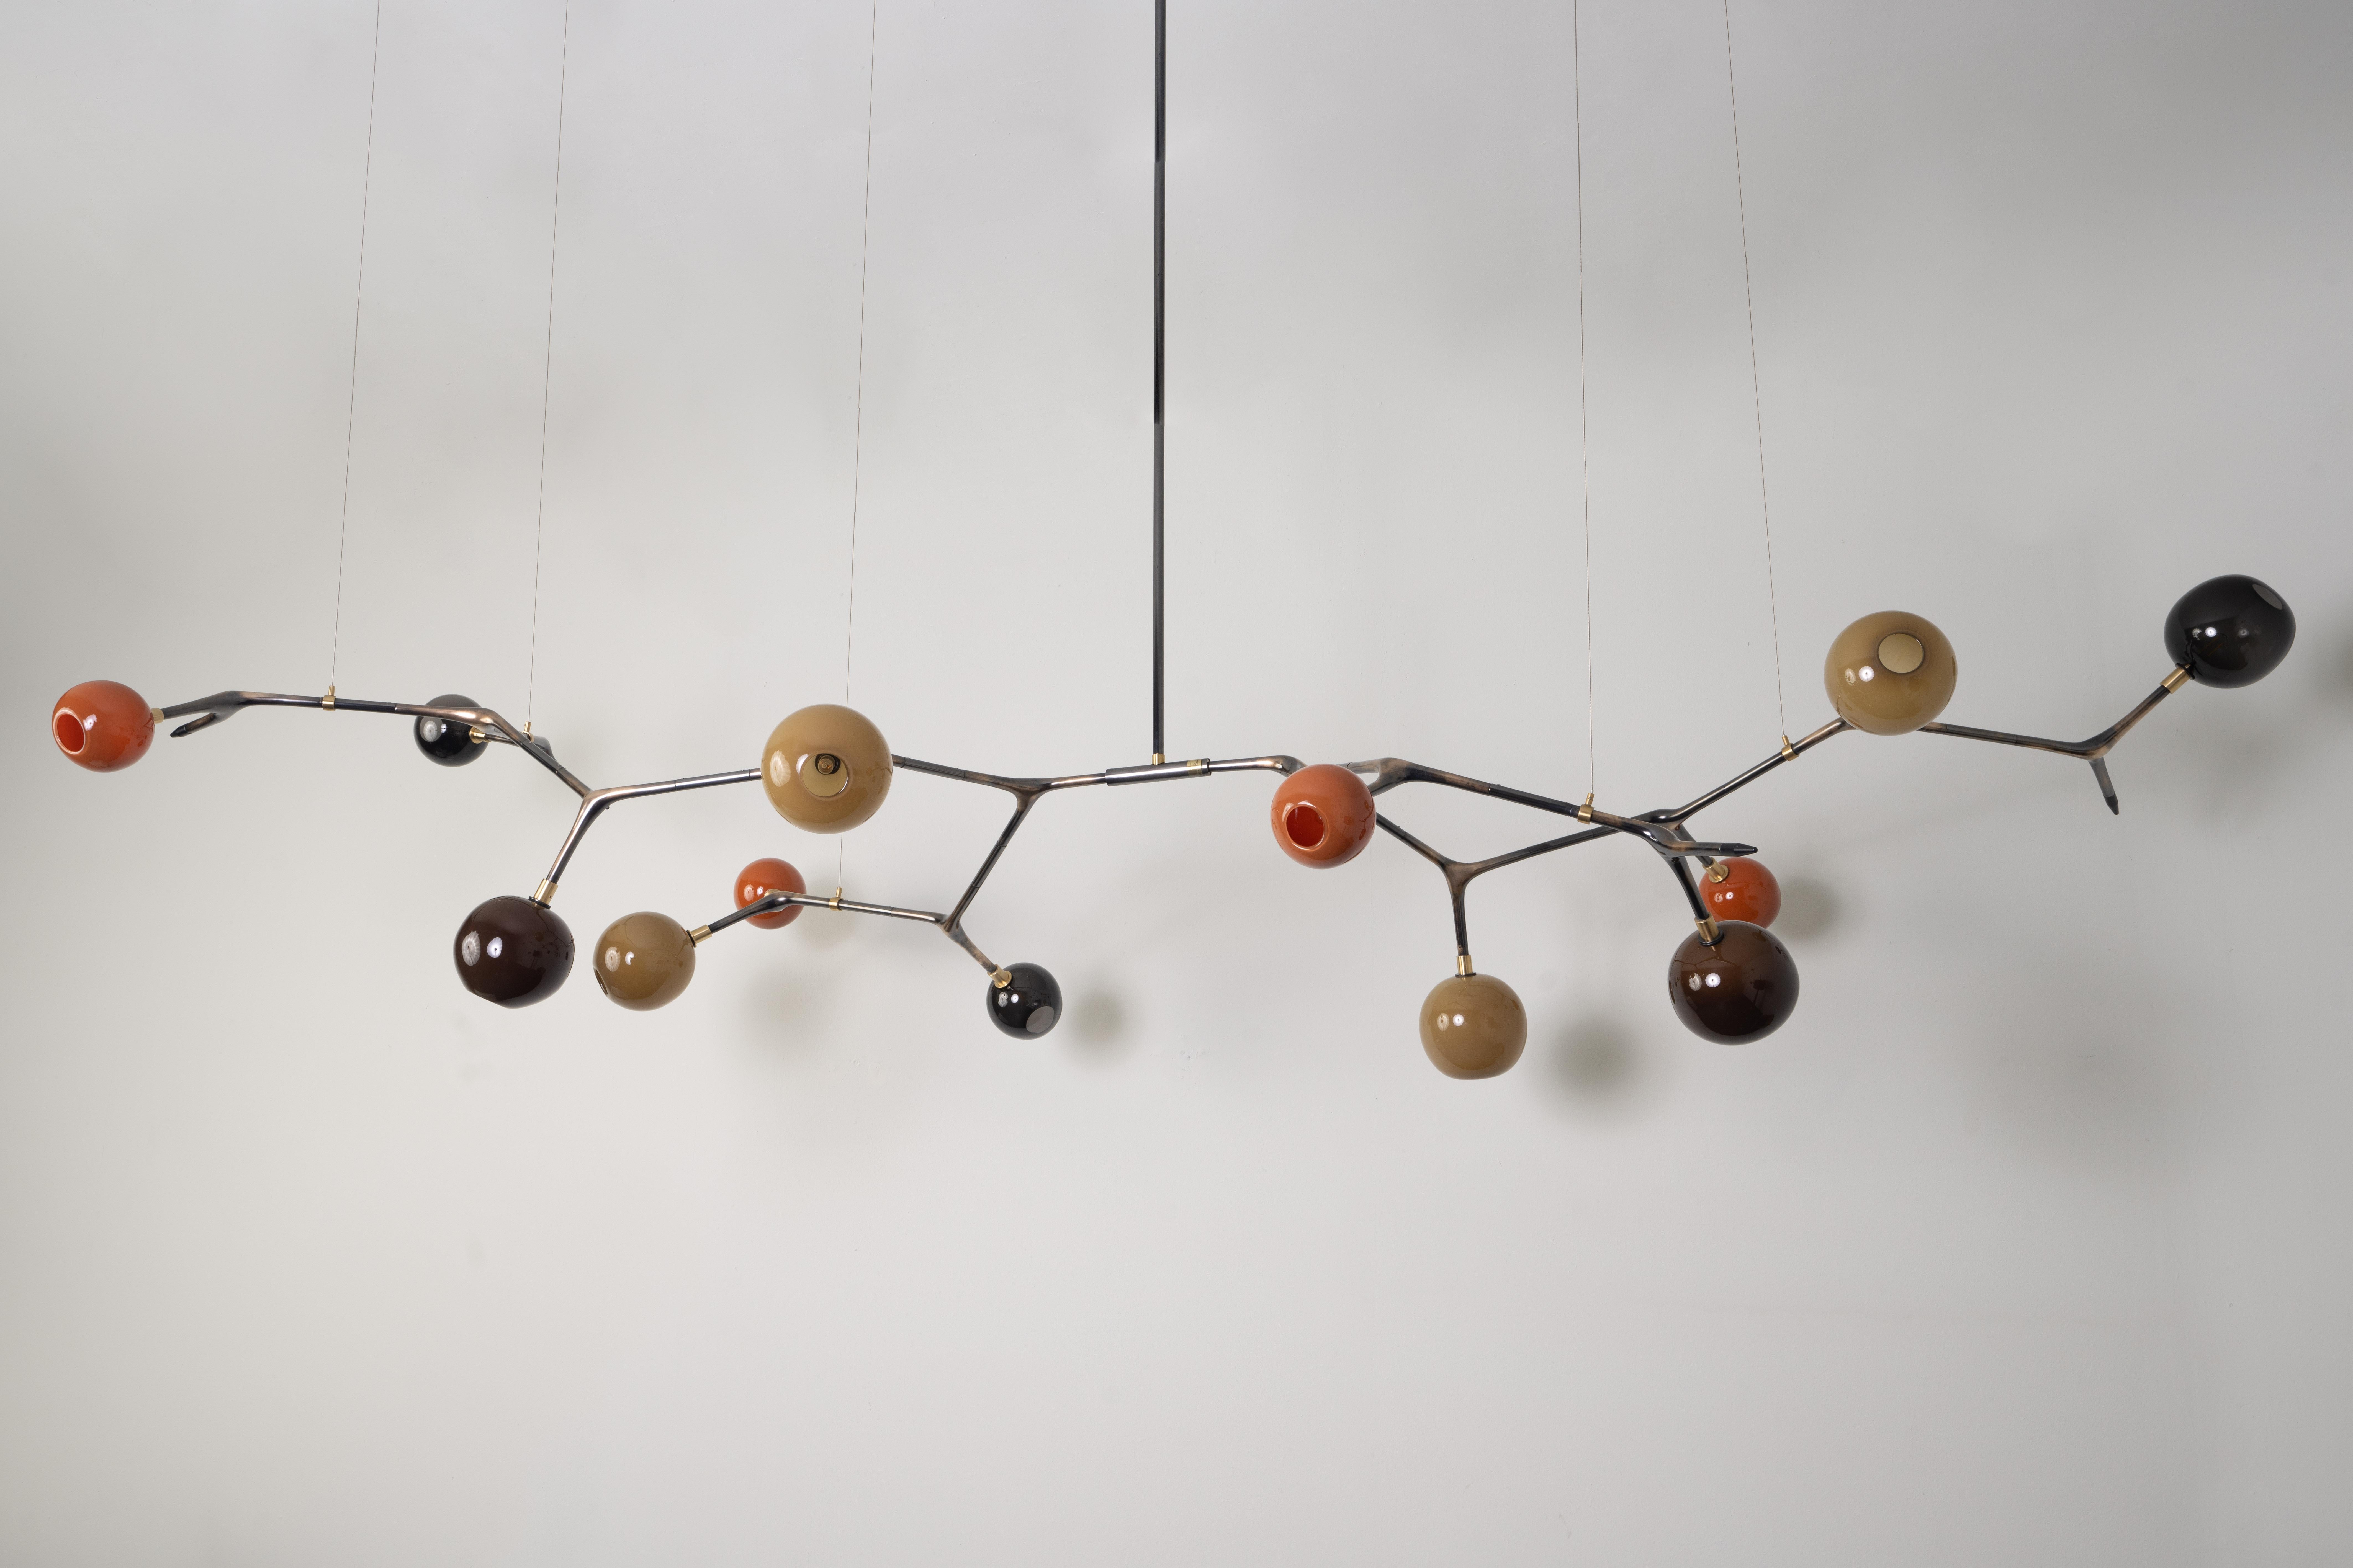 Fall Vintage Bronze Mantis 13 Pendant Lamp by Isabel Moncada
Dimensions: Ø 280 x H 145 cm.
Materials: Cast bronze with vintage finish, blown glass and turned brass.
Weight: 17 kg.

Just like the insect it shares its name with, this piece is